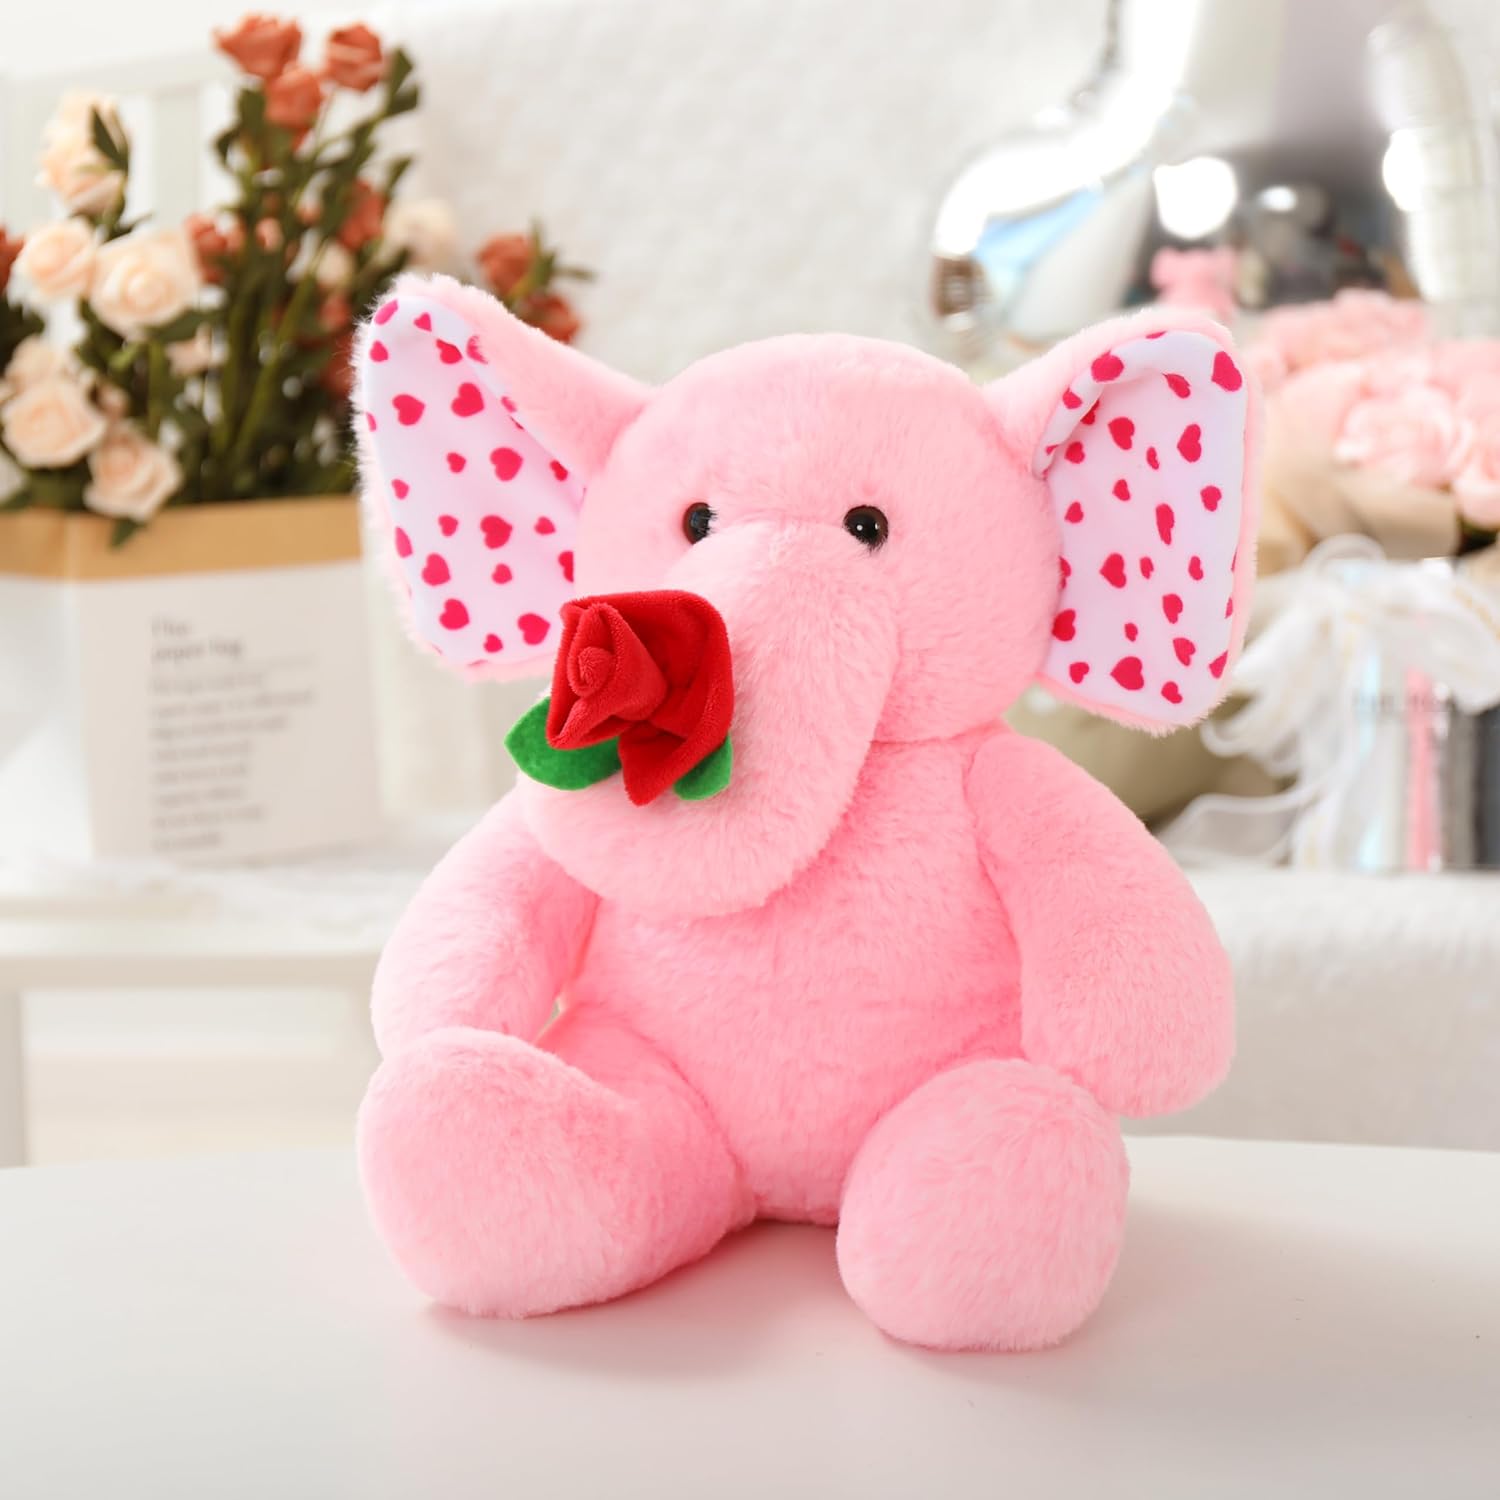 Elephant Plush Toy, Pink, 12 Inches